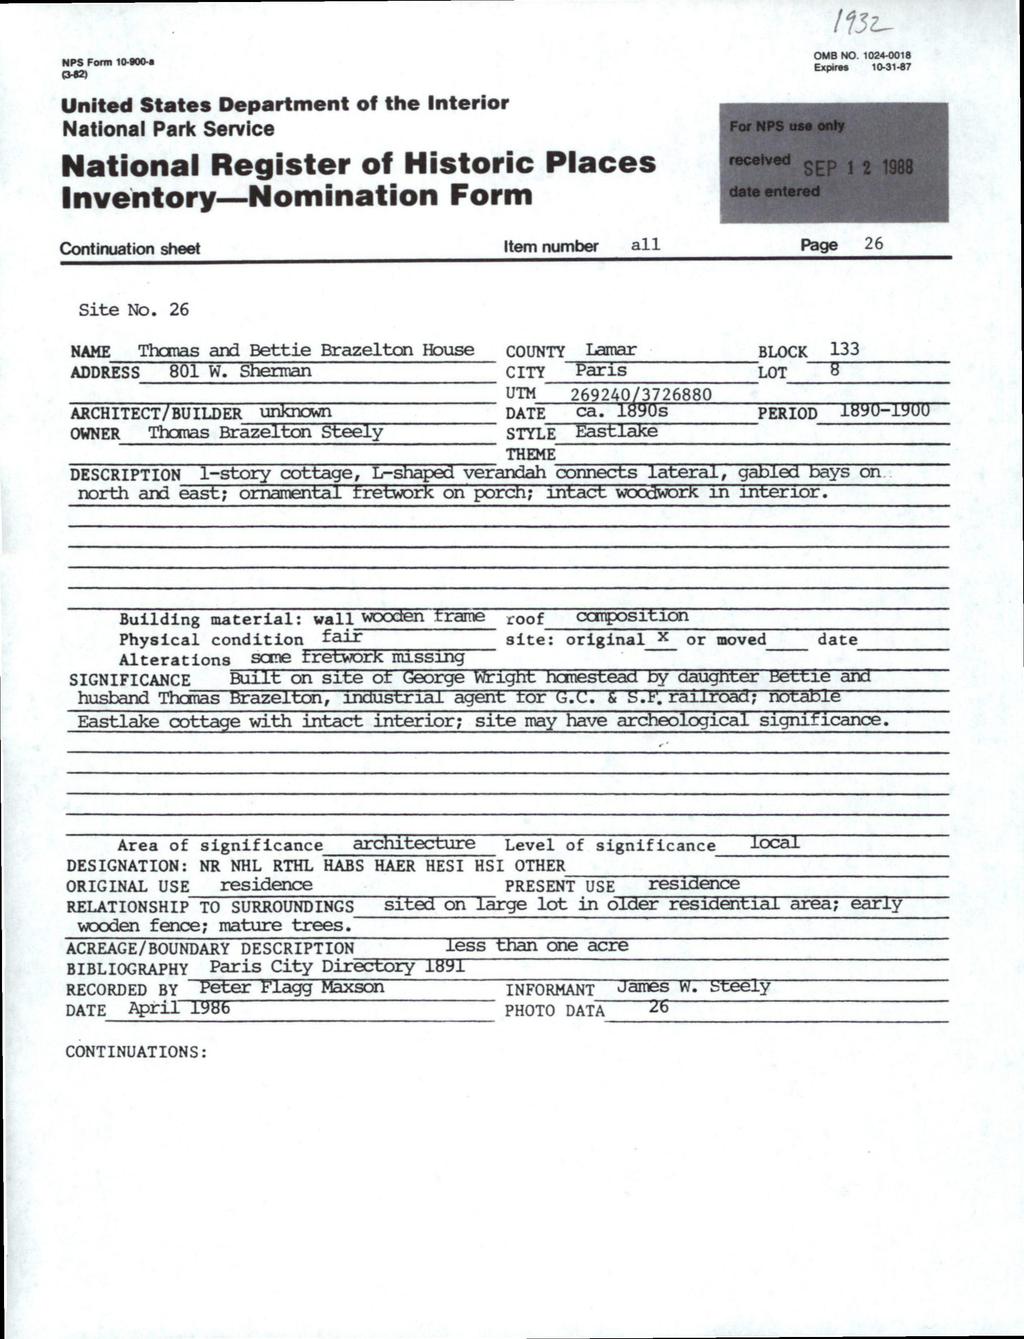 NPS Fontl 10-900-1 OMB NO 1024-0018 Expires 10-31-87 United States Department of the Interior National Paric Service National Register of Historic Places Inventory Nomination Form Continuation sheet